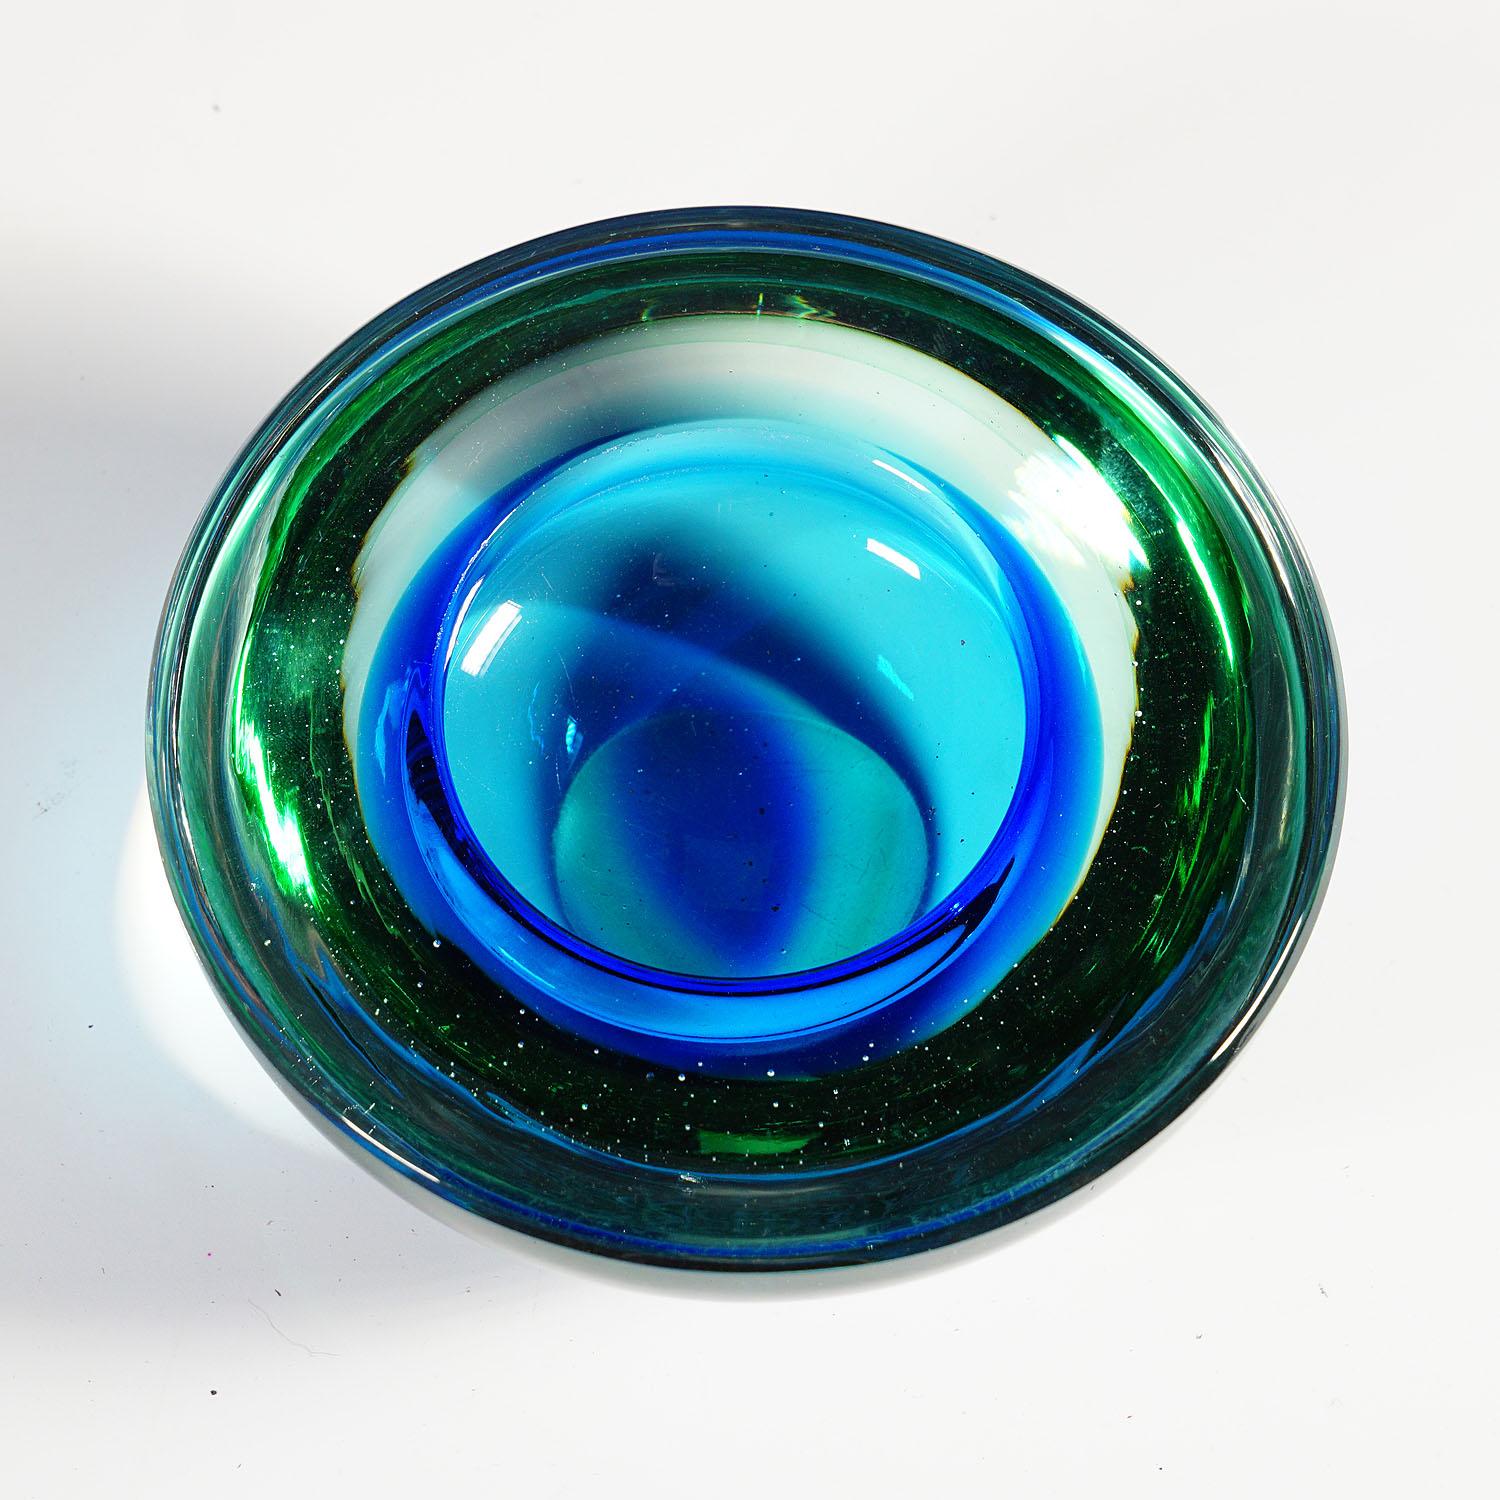 Mid-Century Modern Archimede Seguso Geode Bowl in Green and Blue, Murano Italy Ca. 1950s For Sale